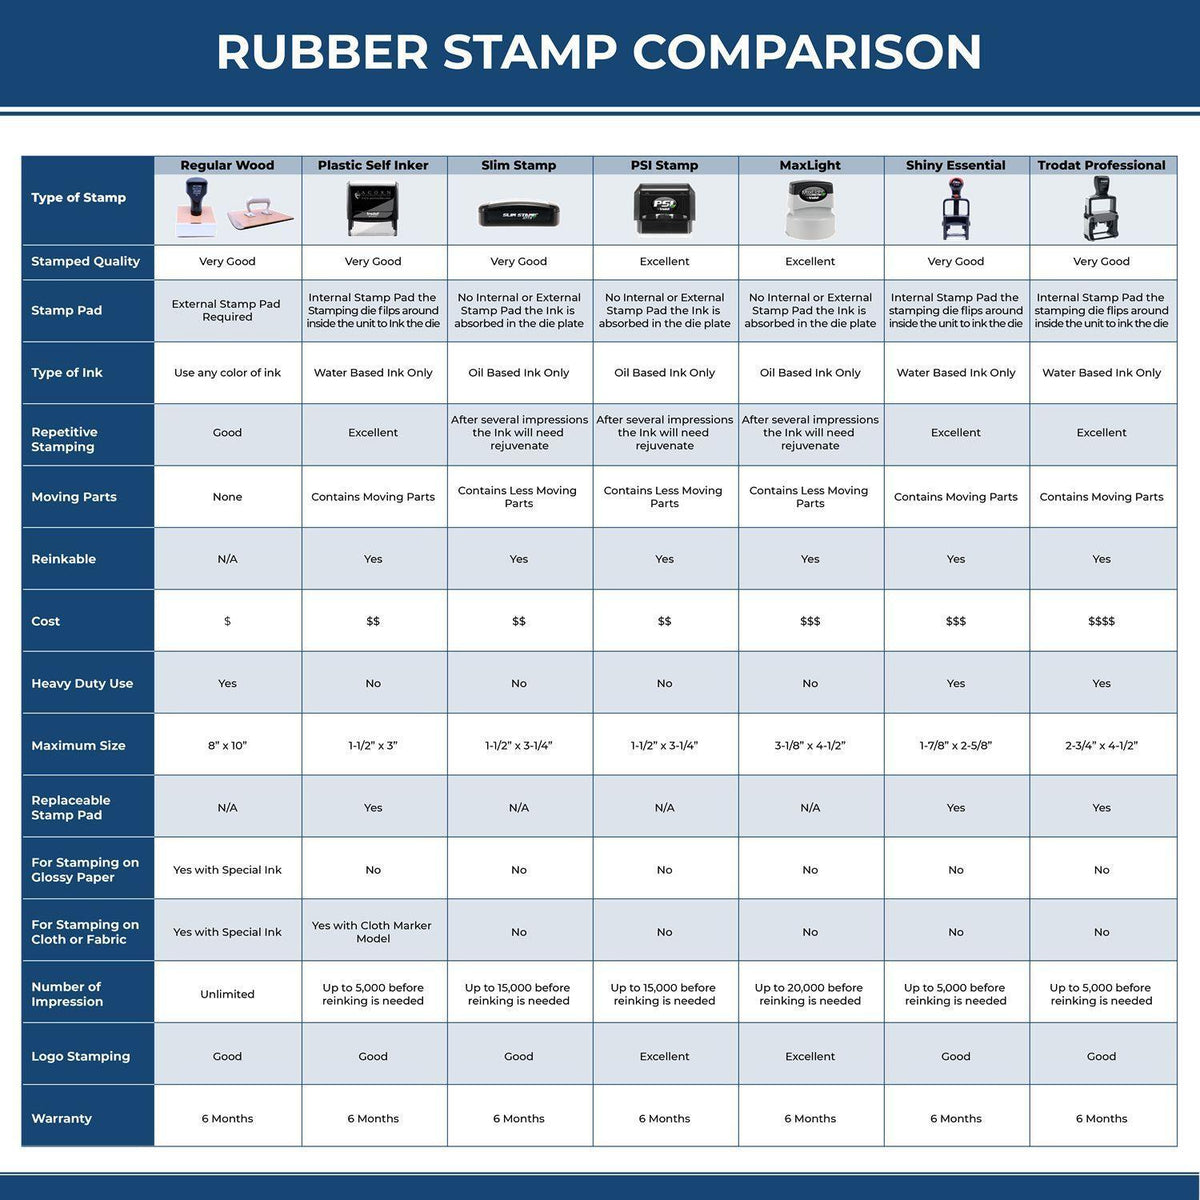 Large Pre-Inked Curly Copy Stamp 4871SLIM Rubber Stamp Comparison